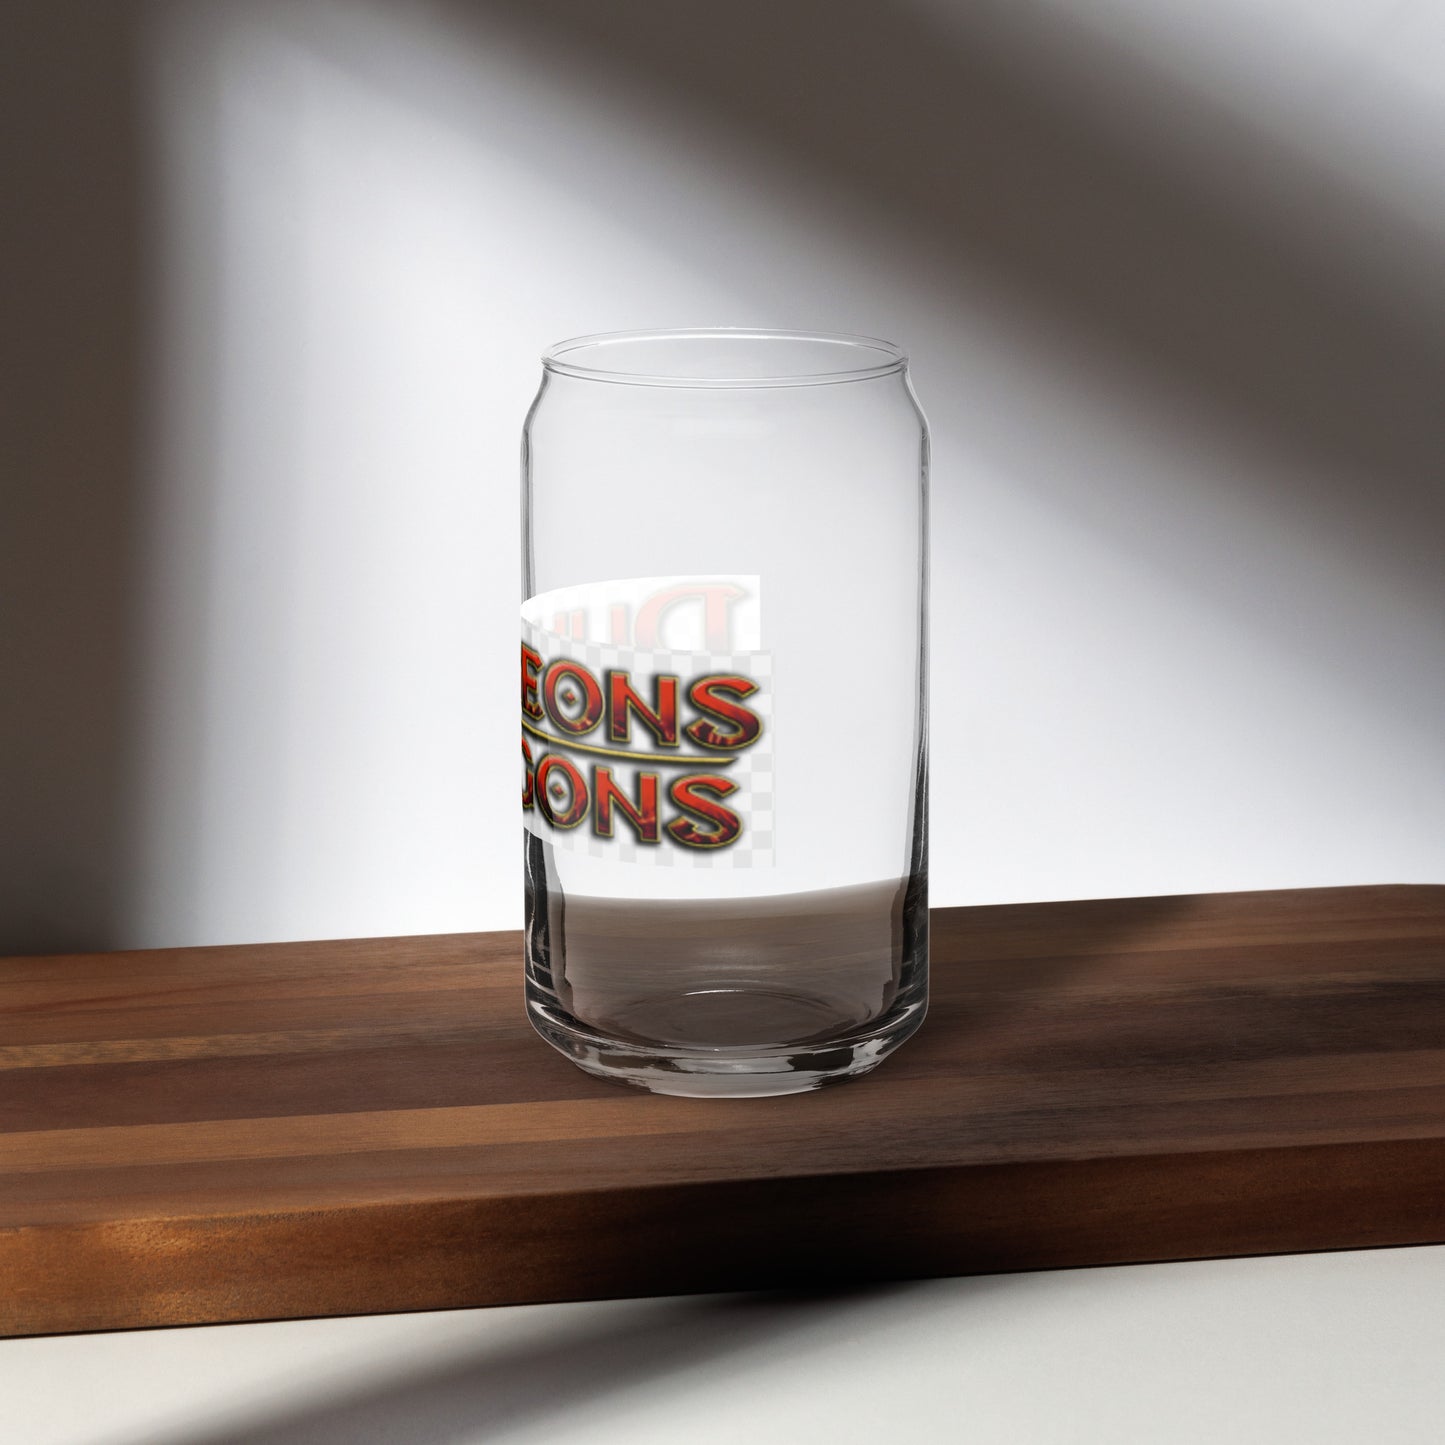 Dungeons & Dragons Can-shaped glass